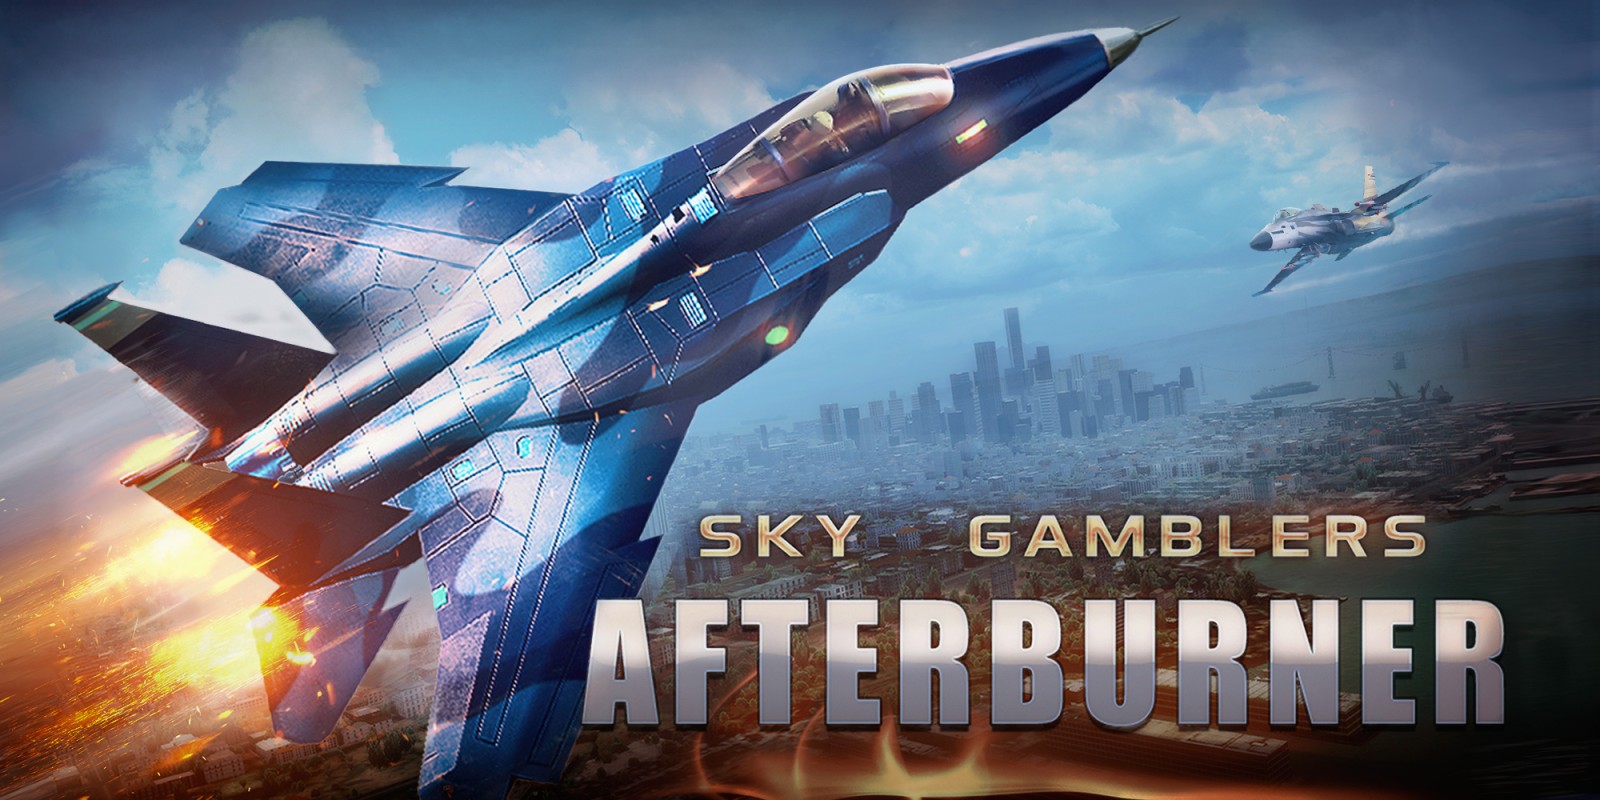 video game company with afterburner